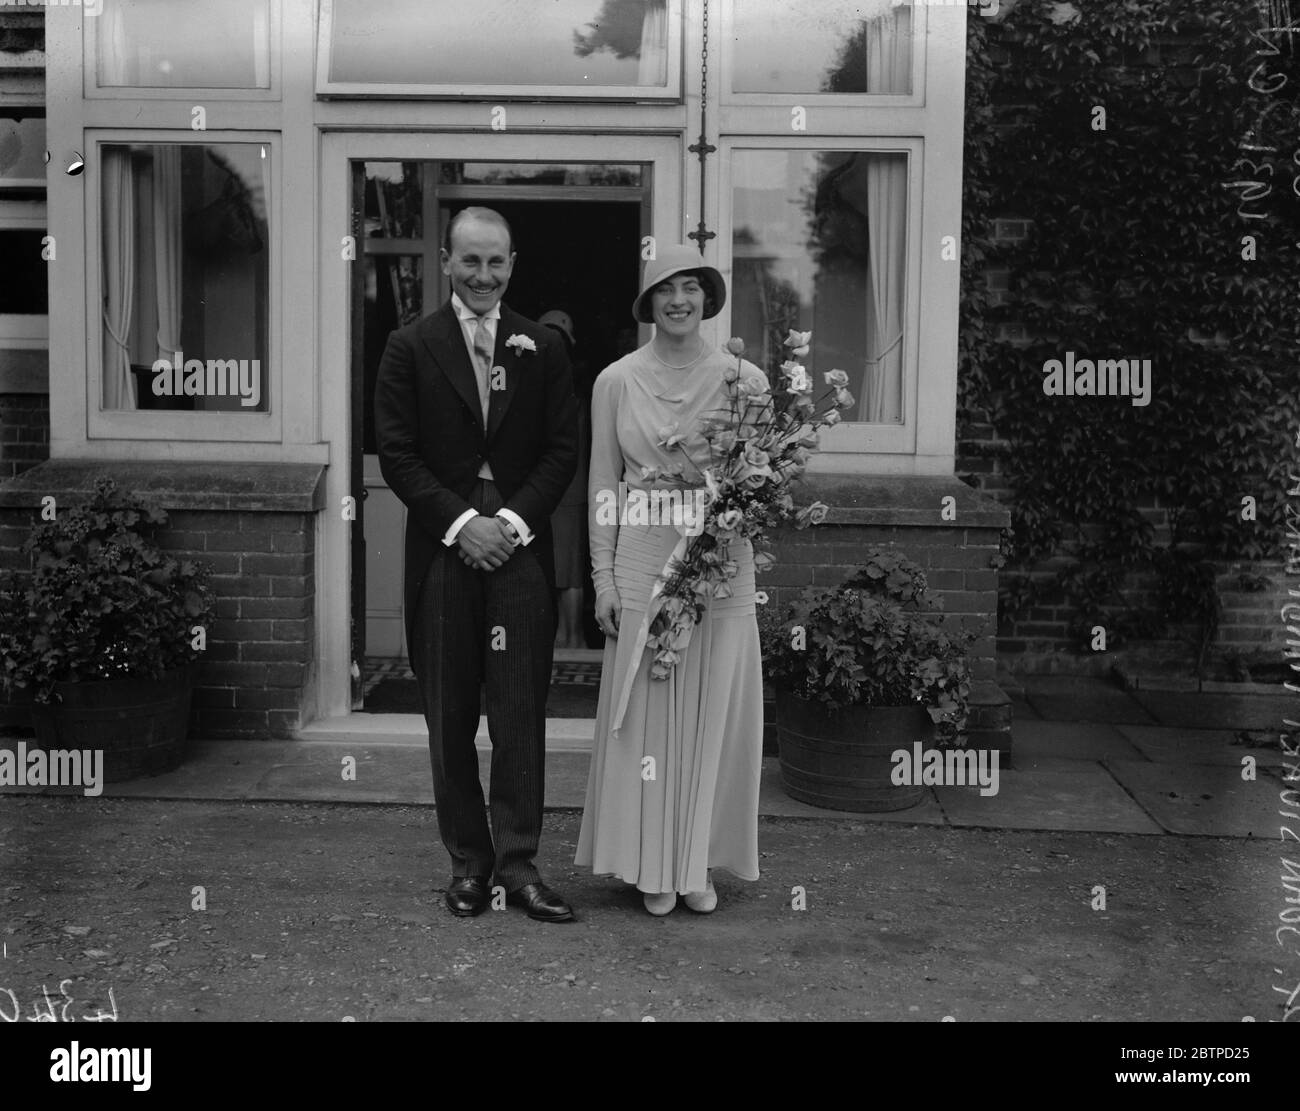 Famous woman motorist Wednesday . The marriage in the little village church of Stoke D ' Anernon Cobham , Surrey , of Miss Violette Cordrey and Captain John Stuart Hindmarsh . The bride and bridegroom . 15 September 1931 Stock Photo